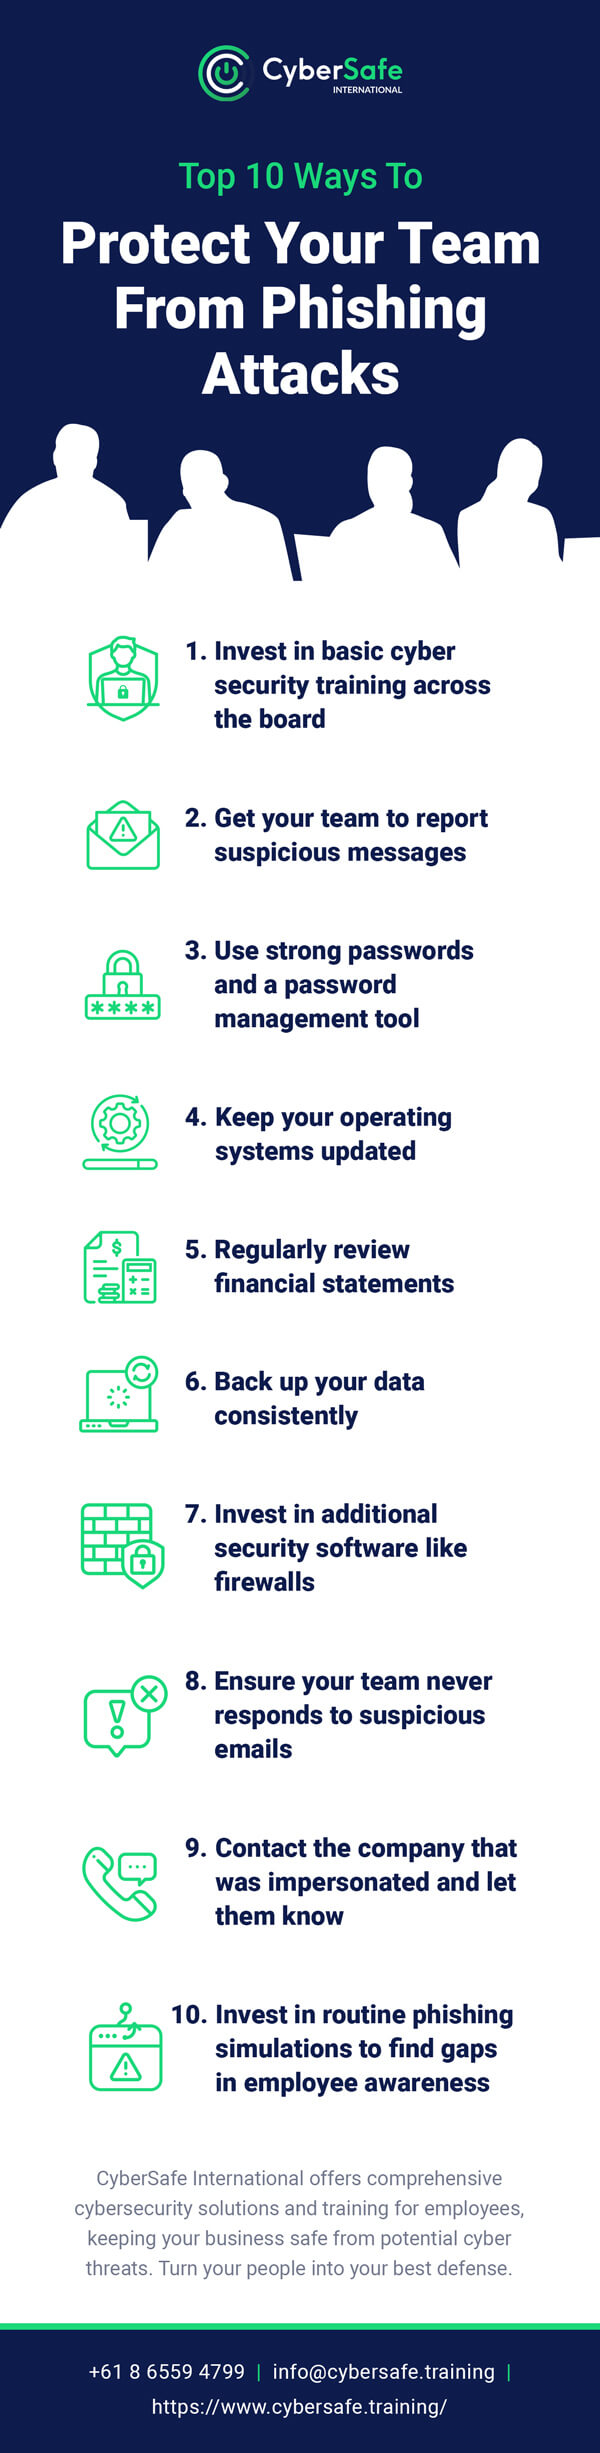 Infographic explaining the top 10 ways to protect your team from phishing attacks